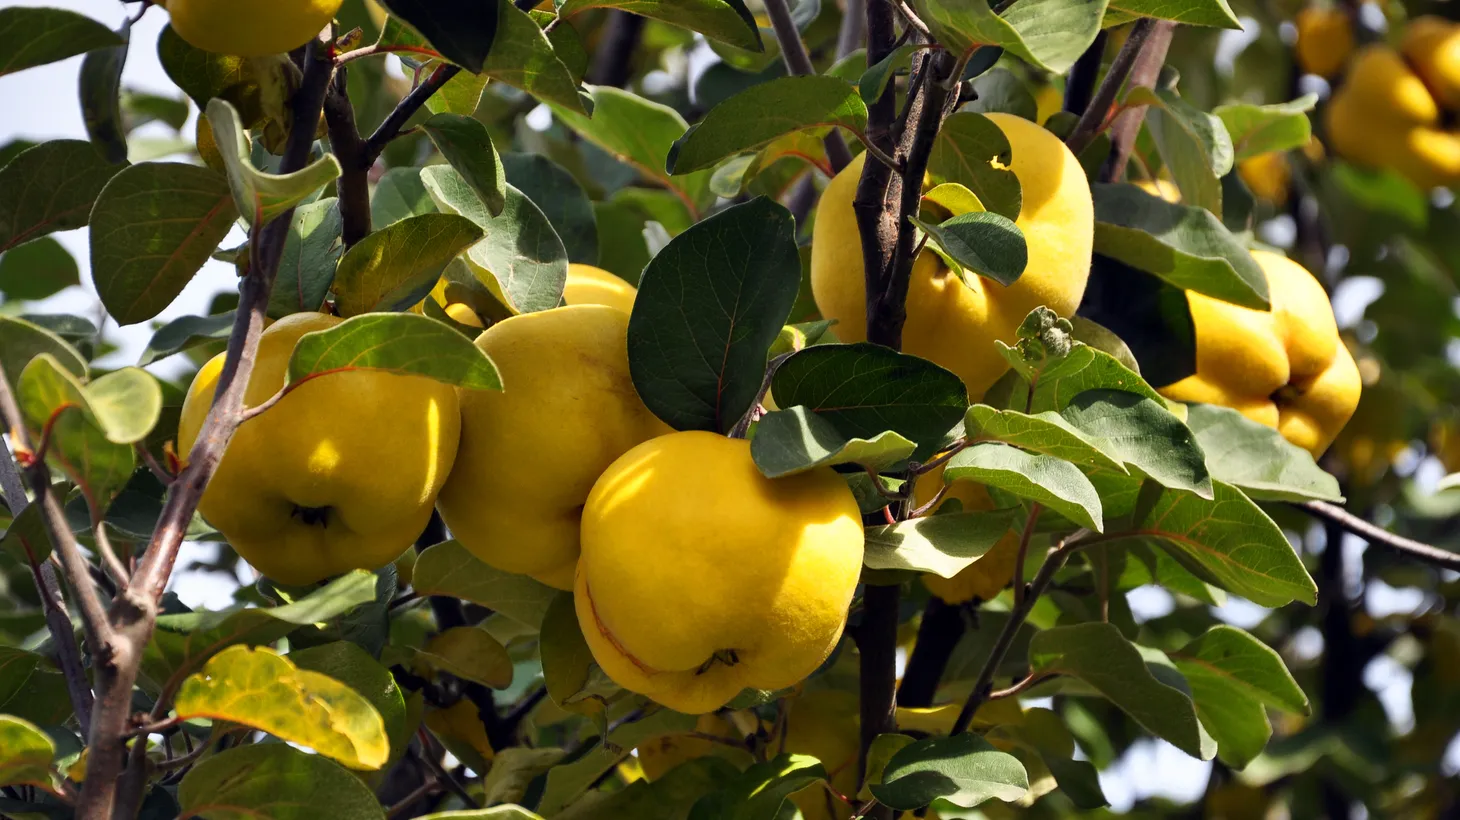 Ripe quinces appear on the tree.